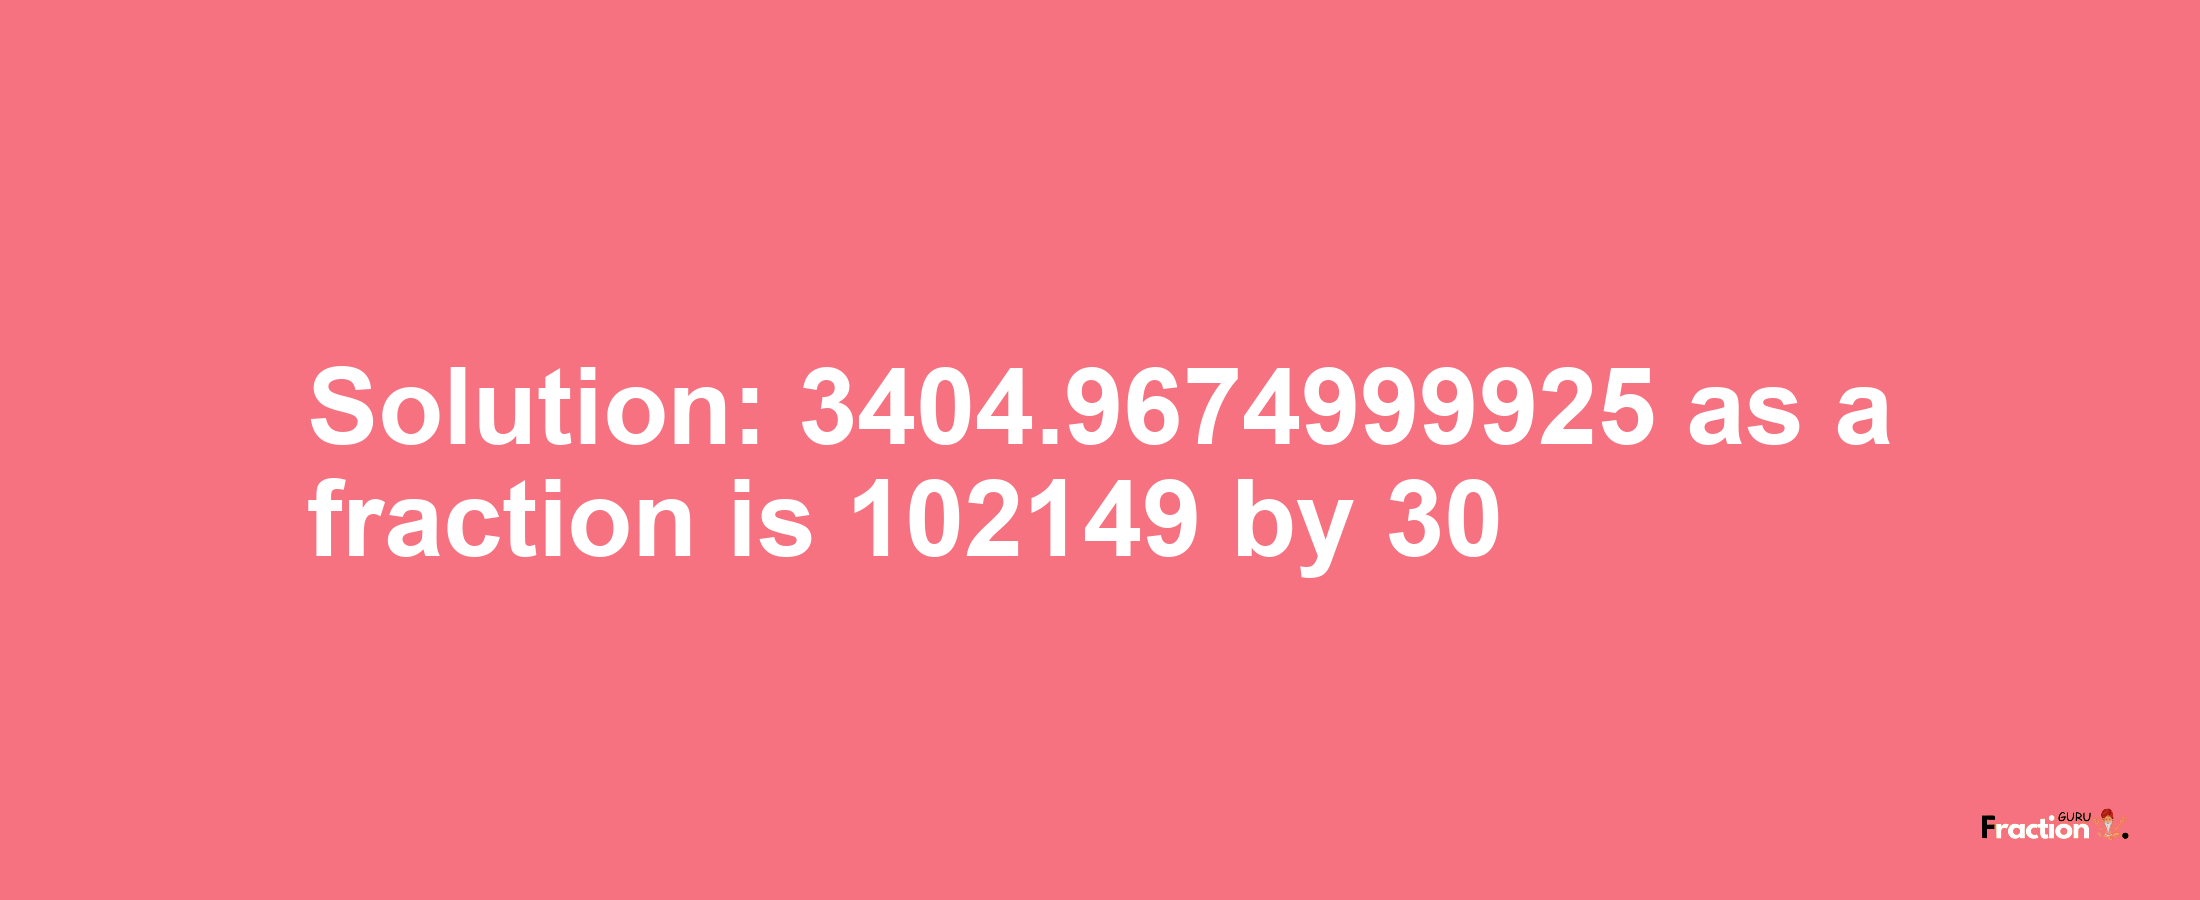 Solution:3404.9674999925 as a fraction is 102149/30